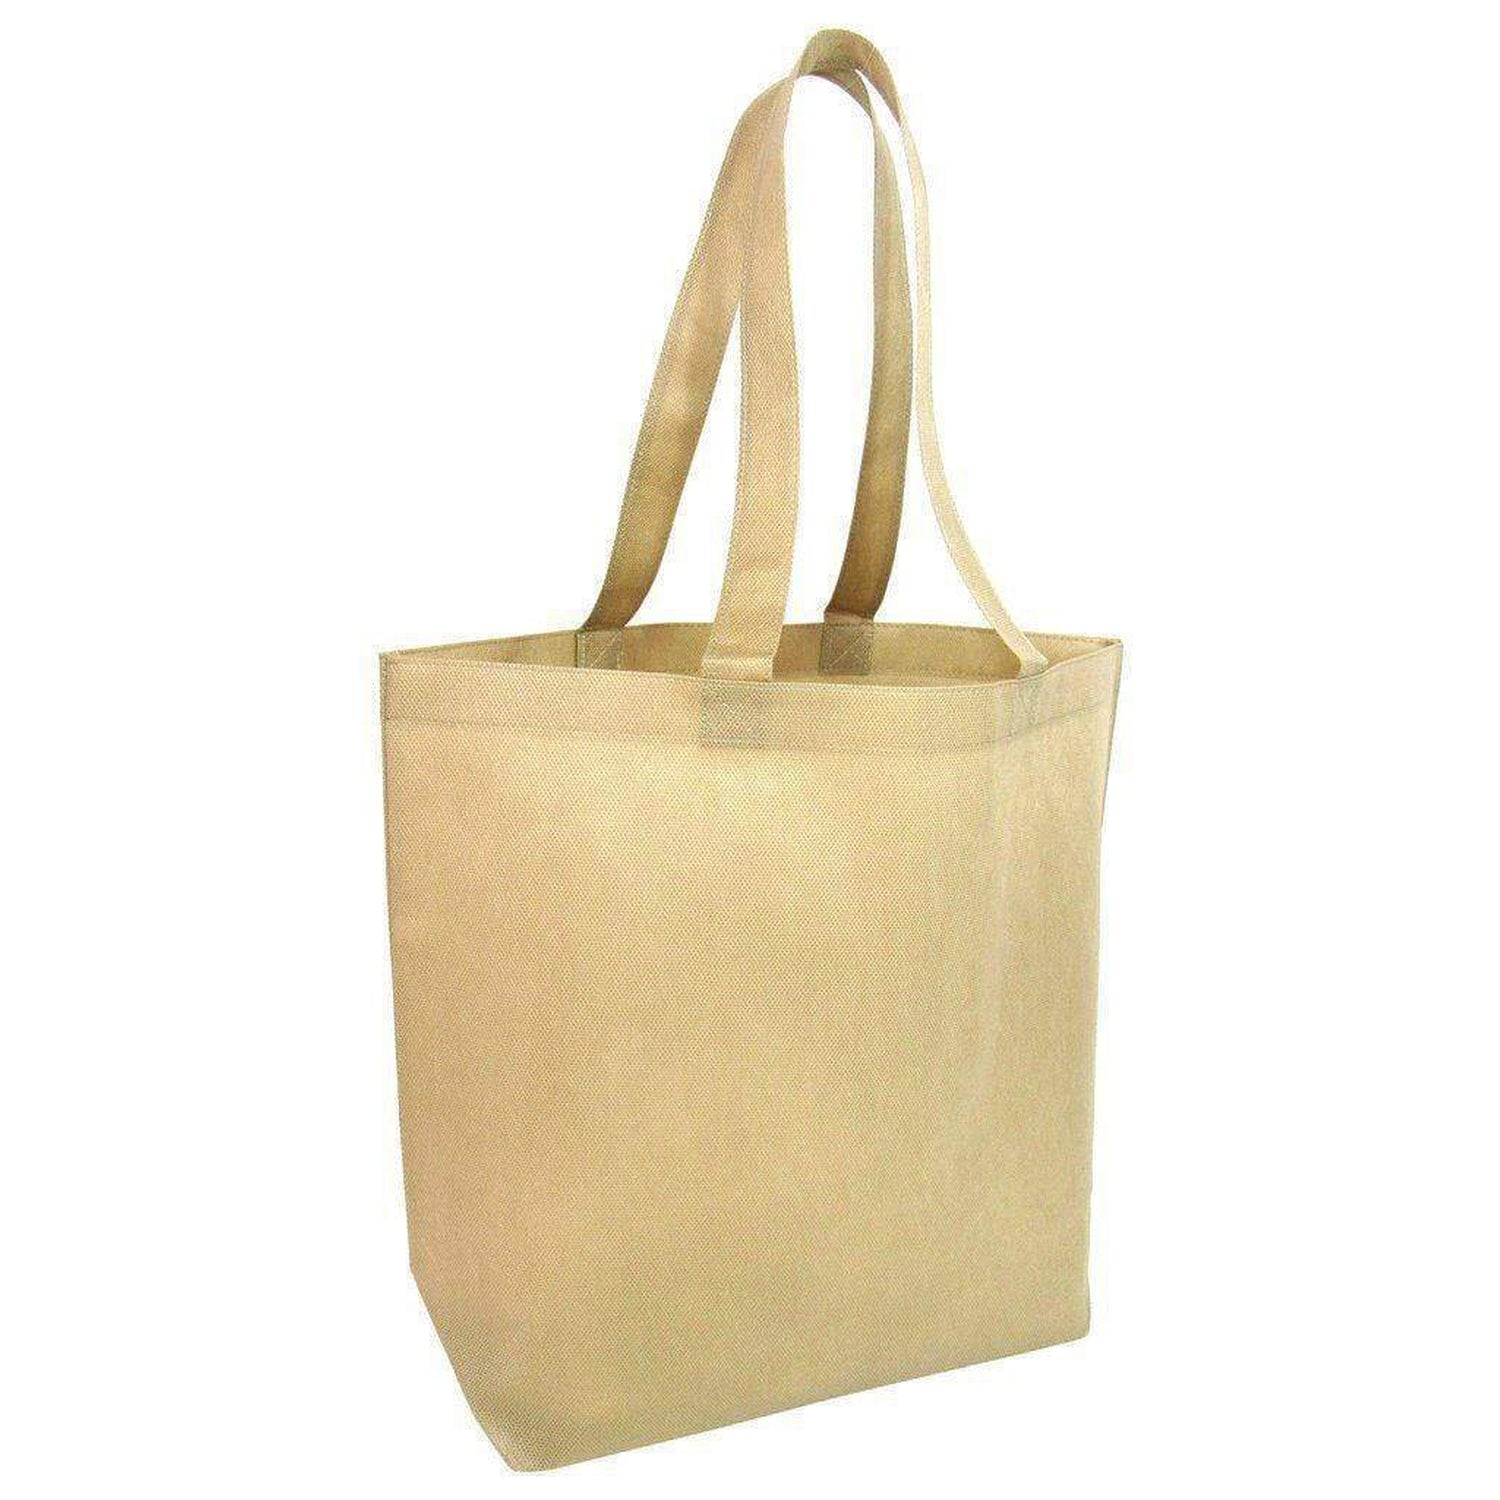 Promotional Non-Woven Large Size Tote Bags with Bottom Gusset - Single ...